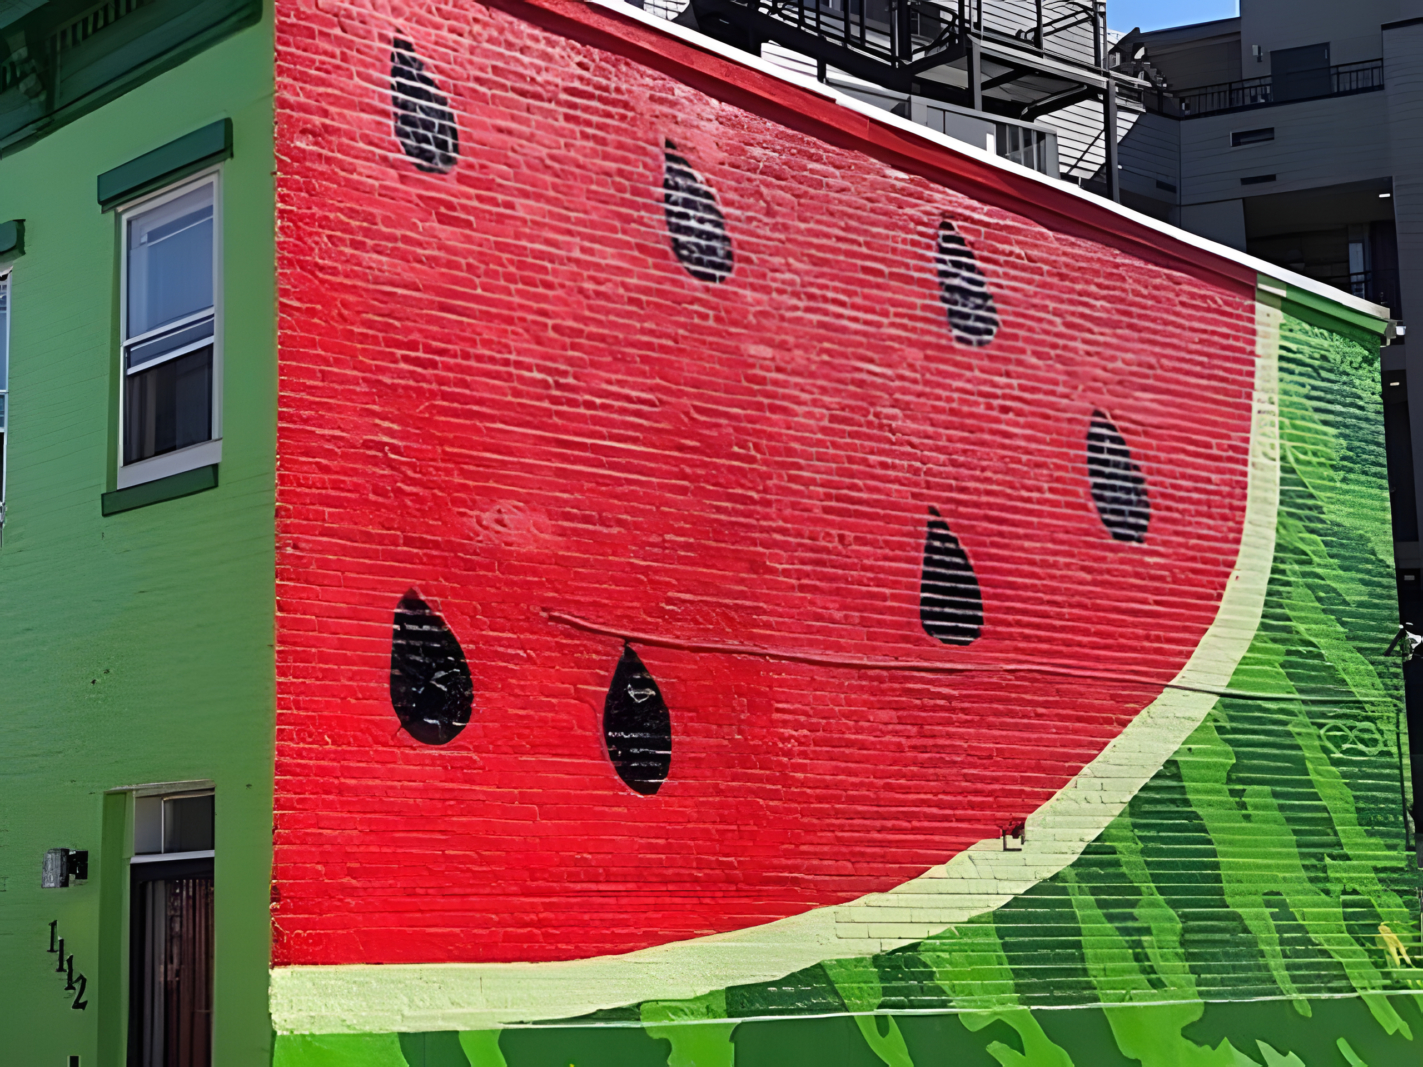 Best Things to do in Washington DC Watermelon House